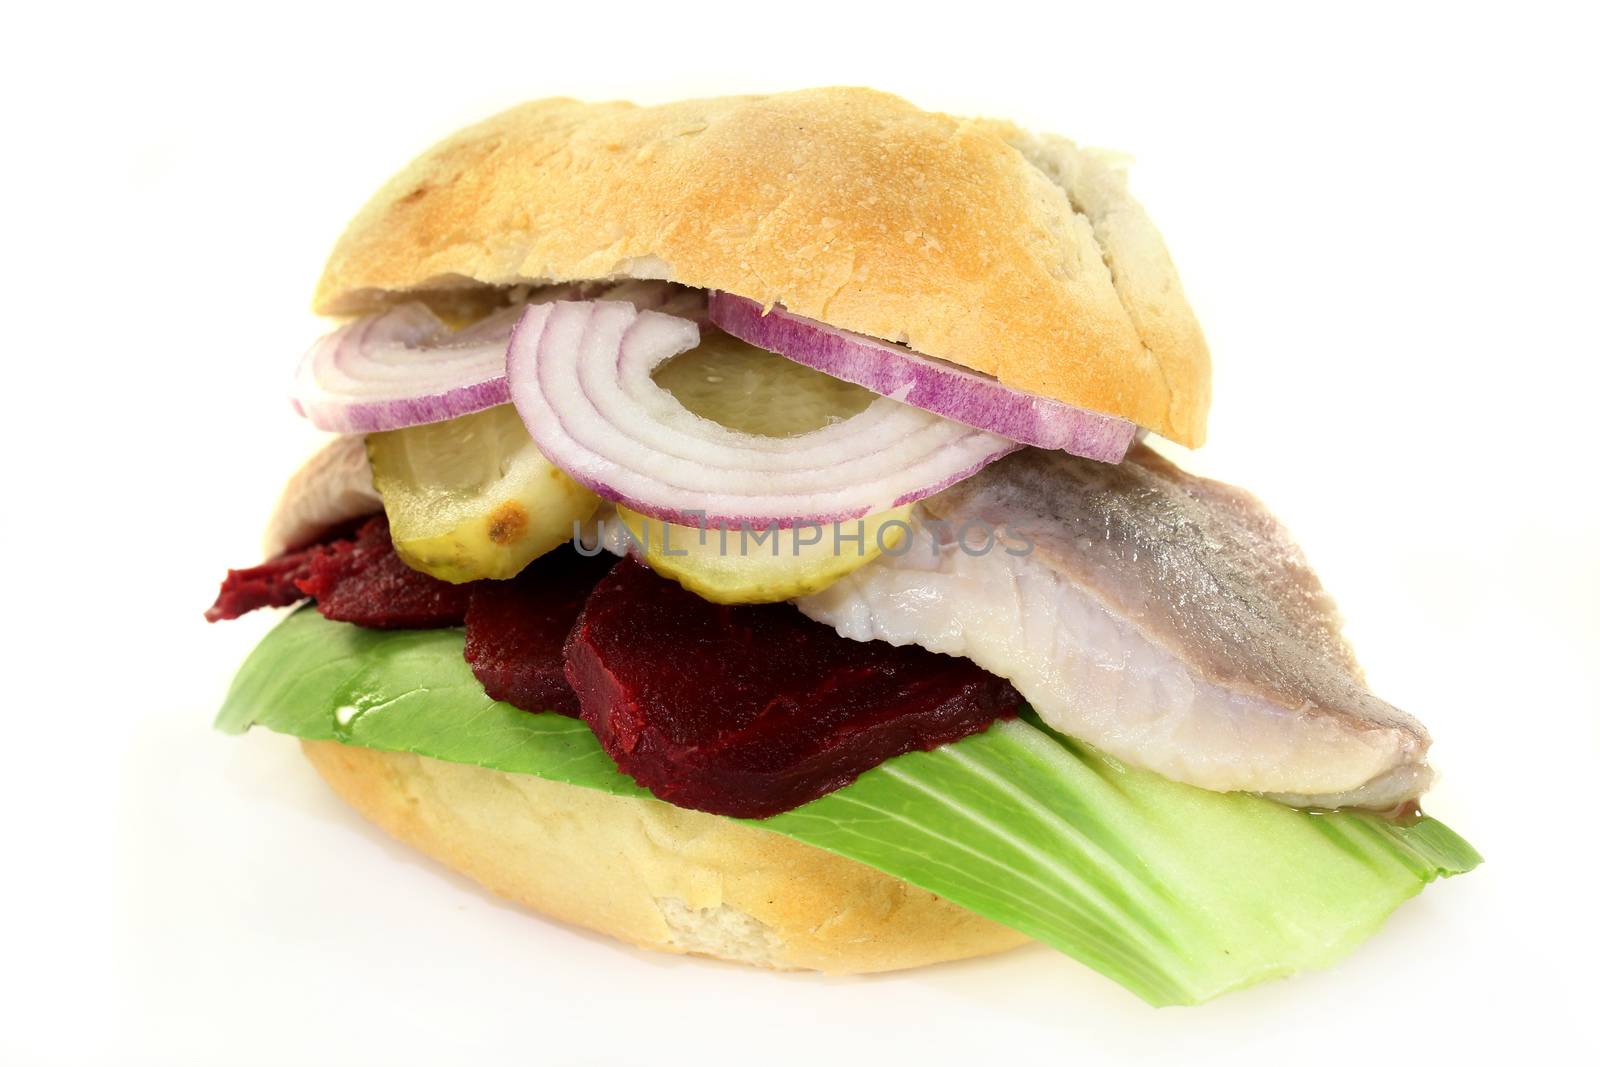 Pickled herring sandwiches with onion, beetroot and pickled cucumber